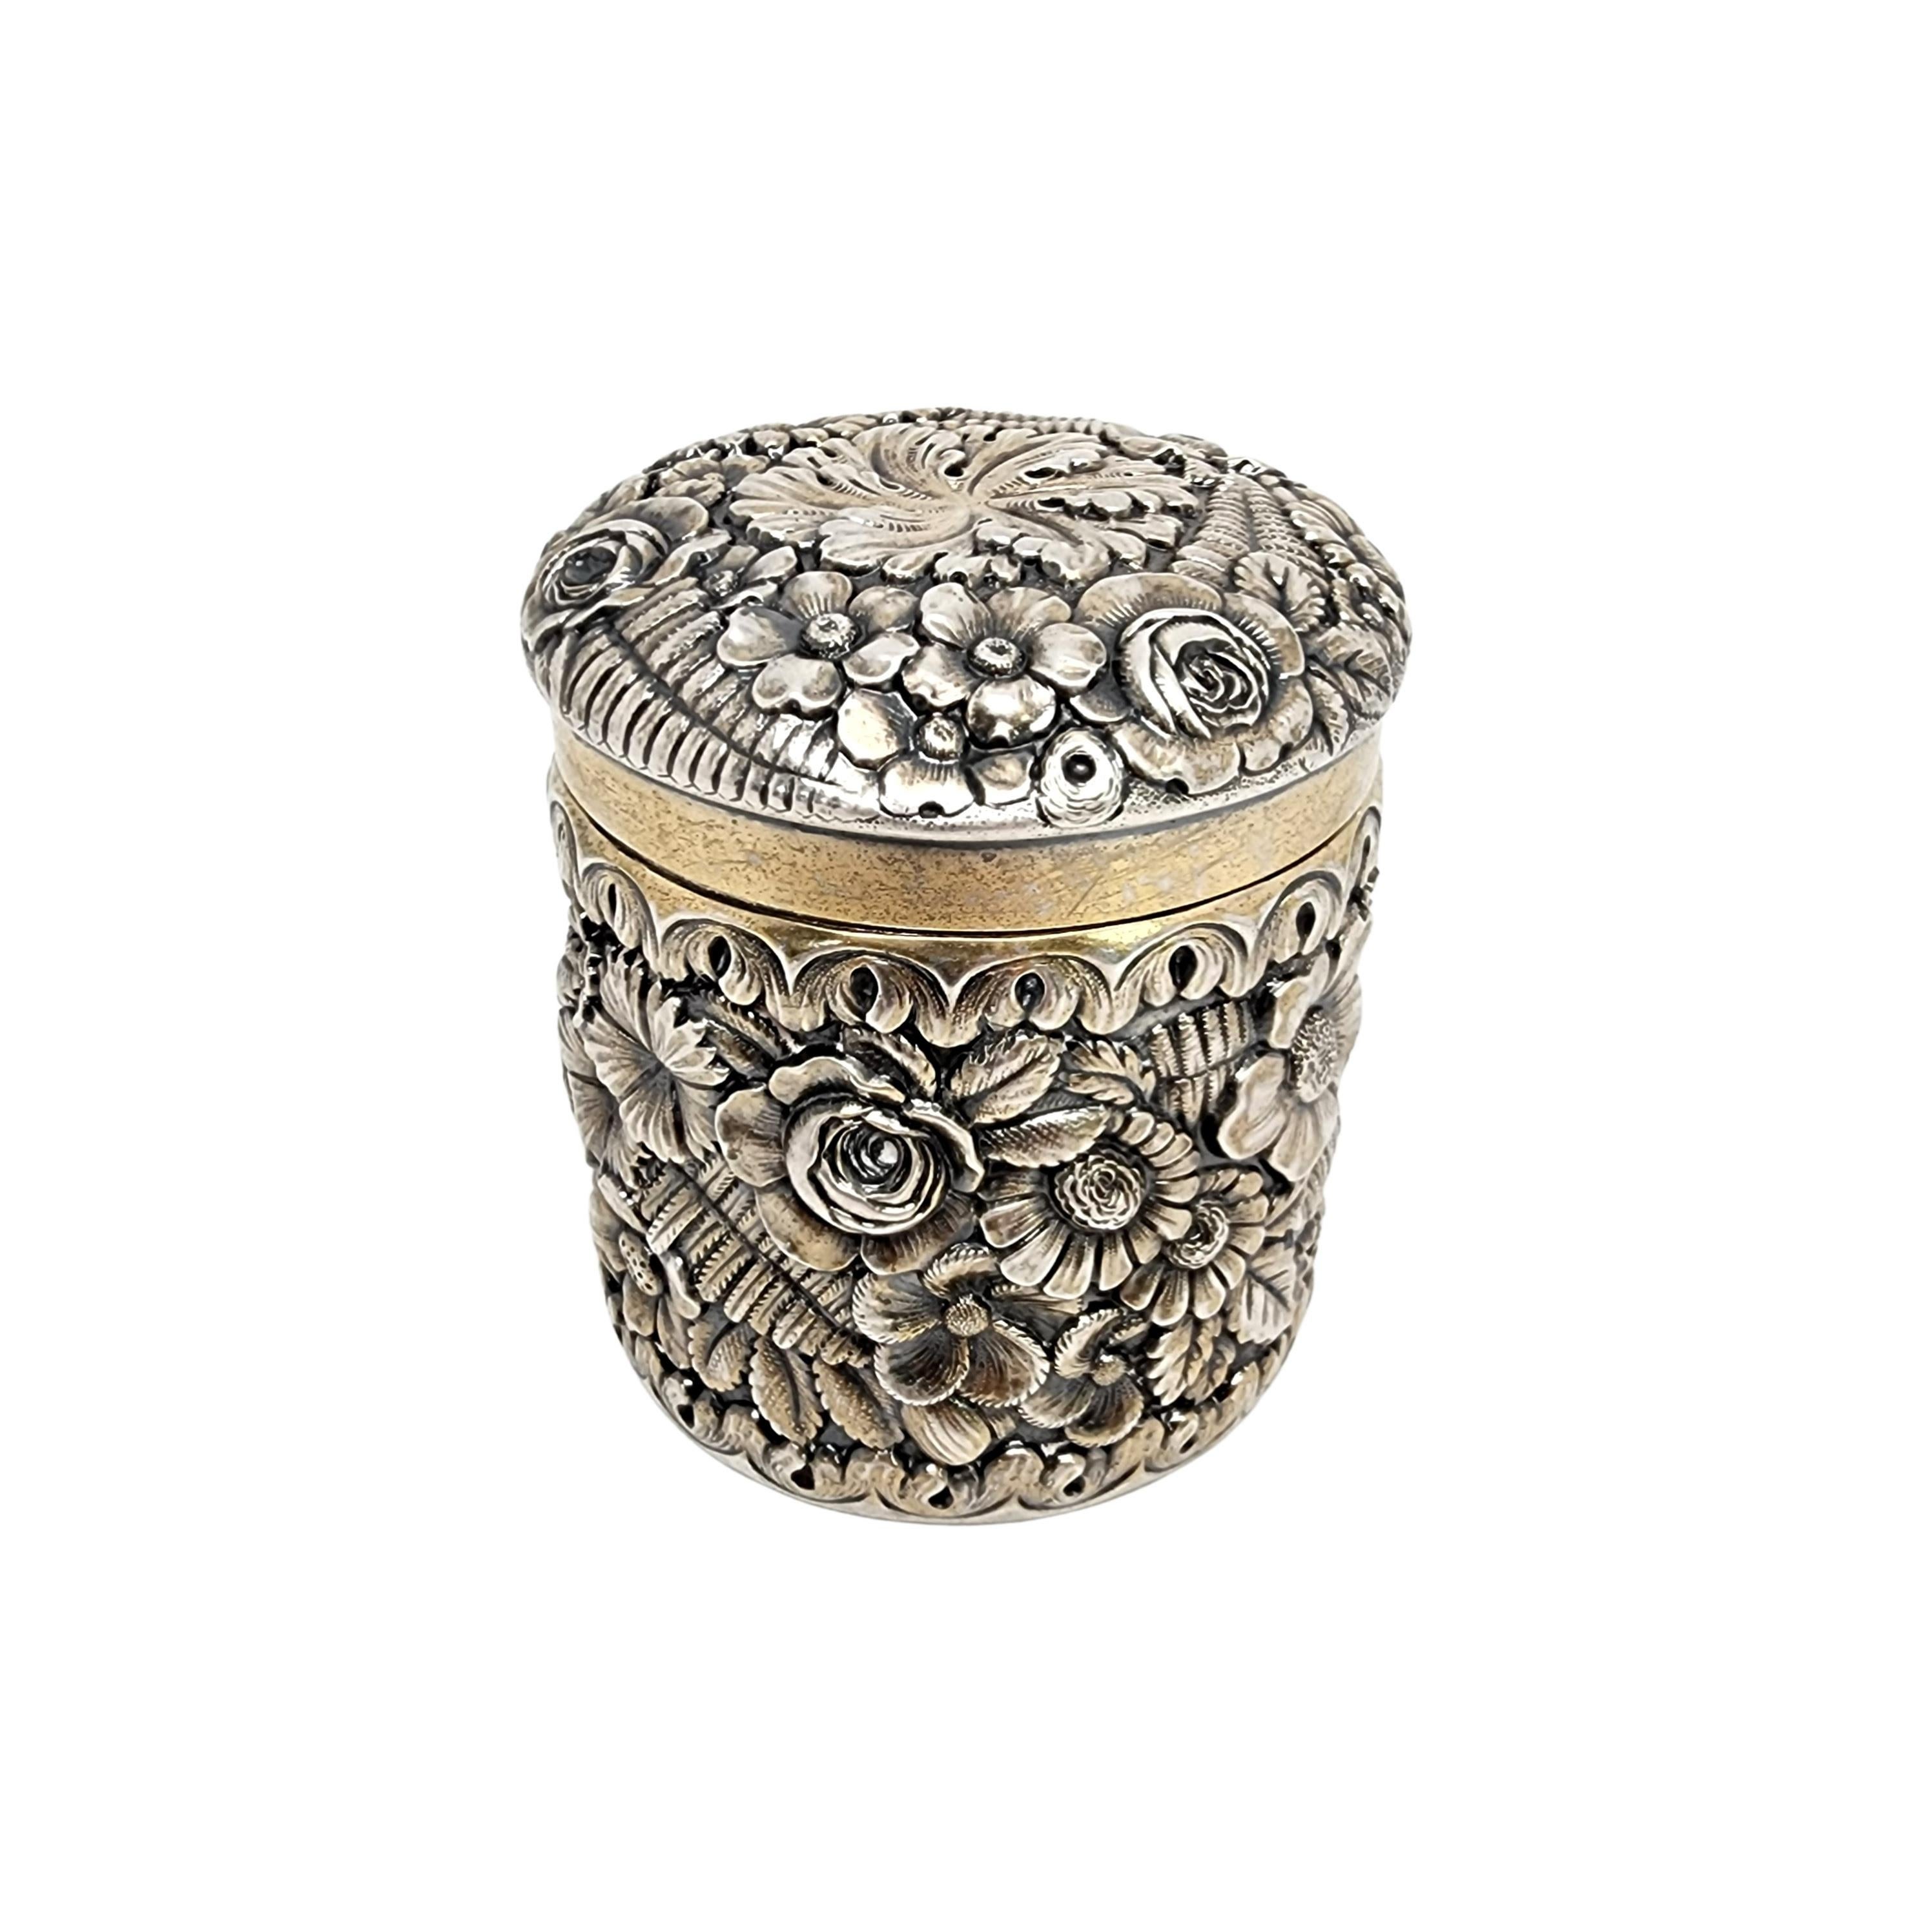 Tiffany & Co. Sterling Silver Gold Wash Repousse Floral and Fern Canister Box 4